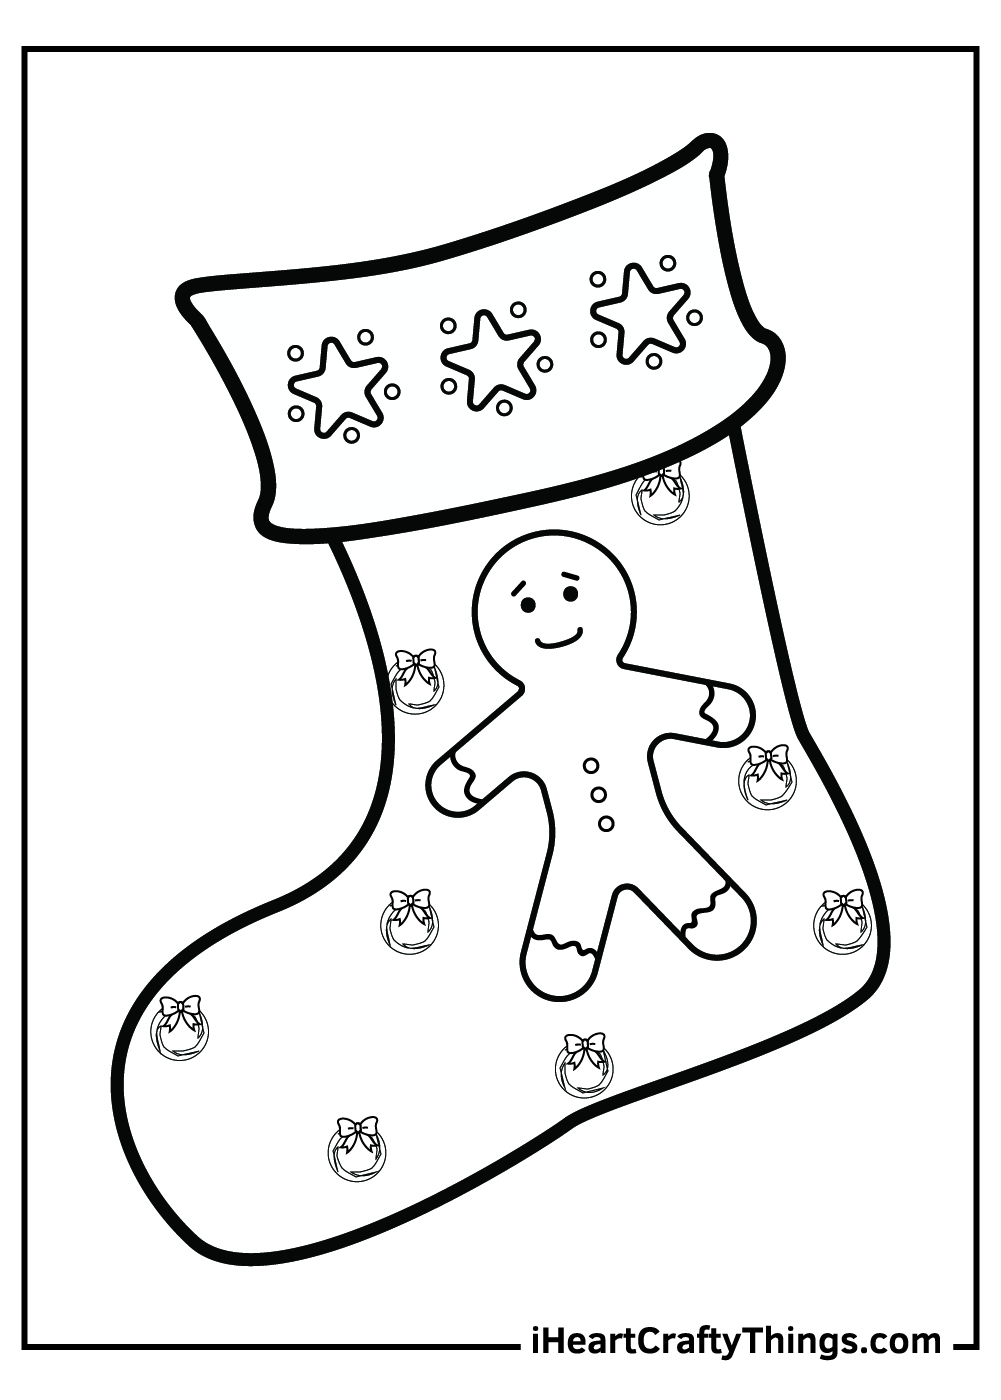 Printable Christmas Stocking Coloring Pages Updated 2021 